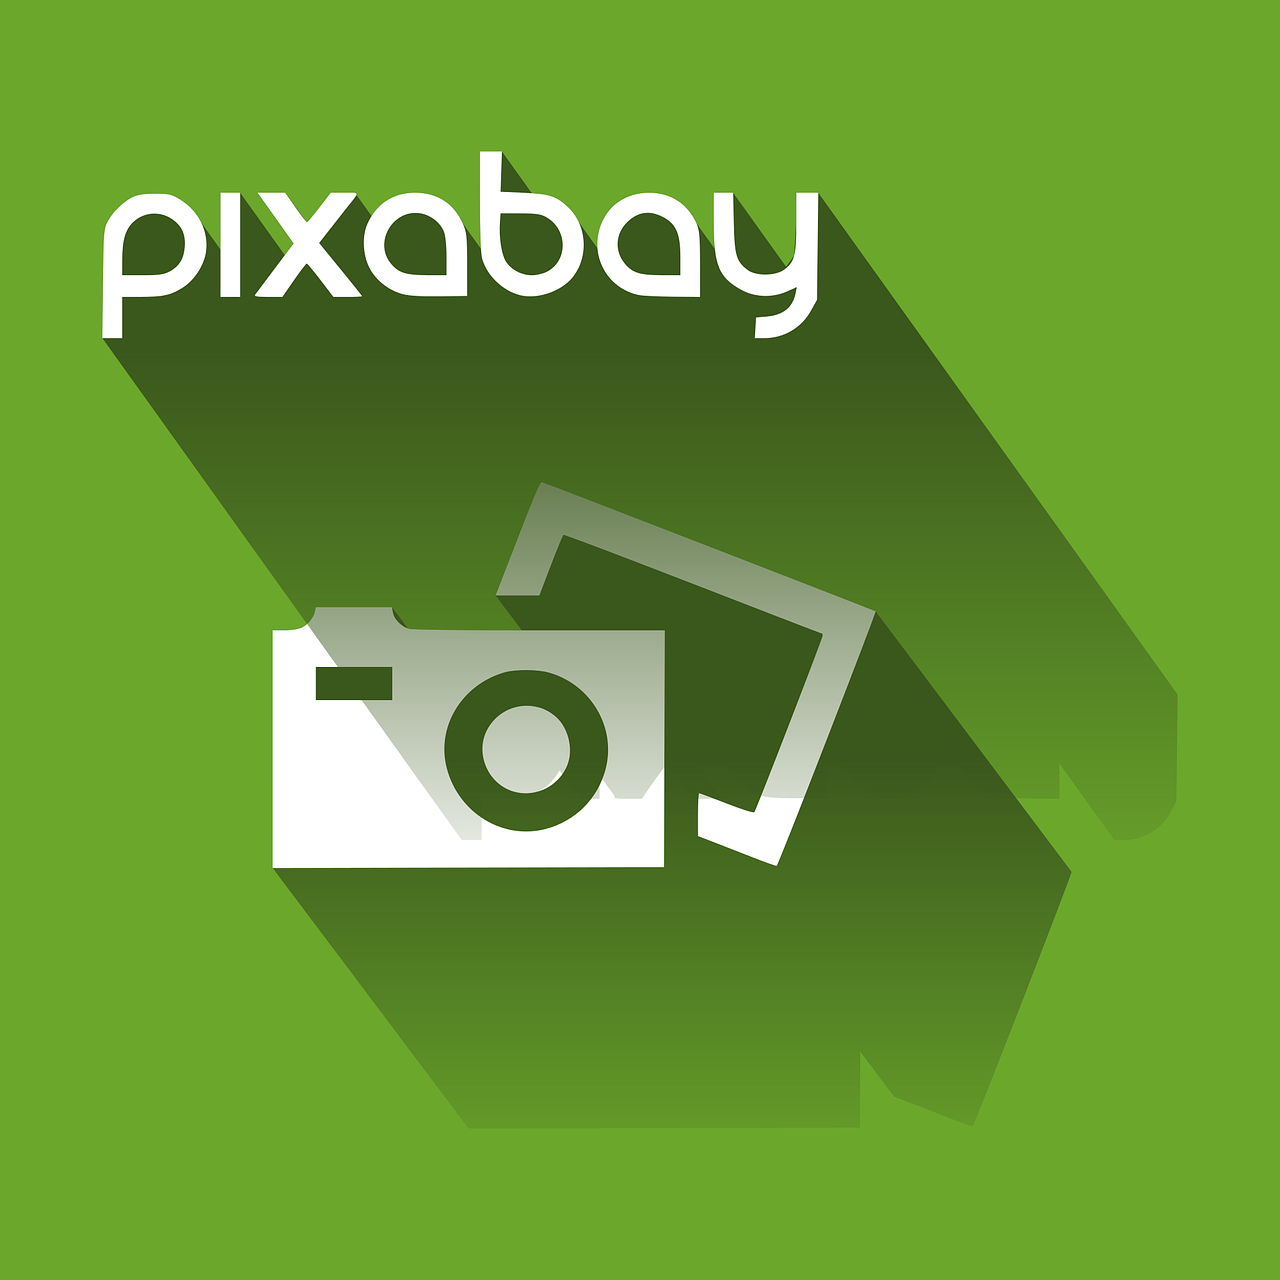 Pixabay is a vibrant community of creatives, sharing copyright free images, videos and music. All contents are released under the Pixabay License.